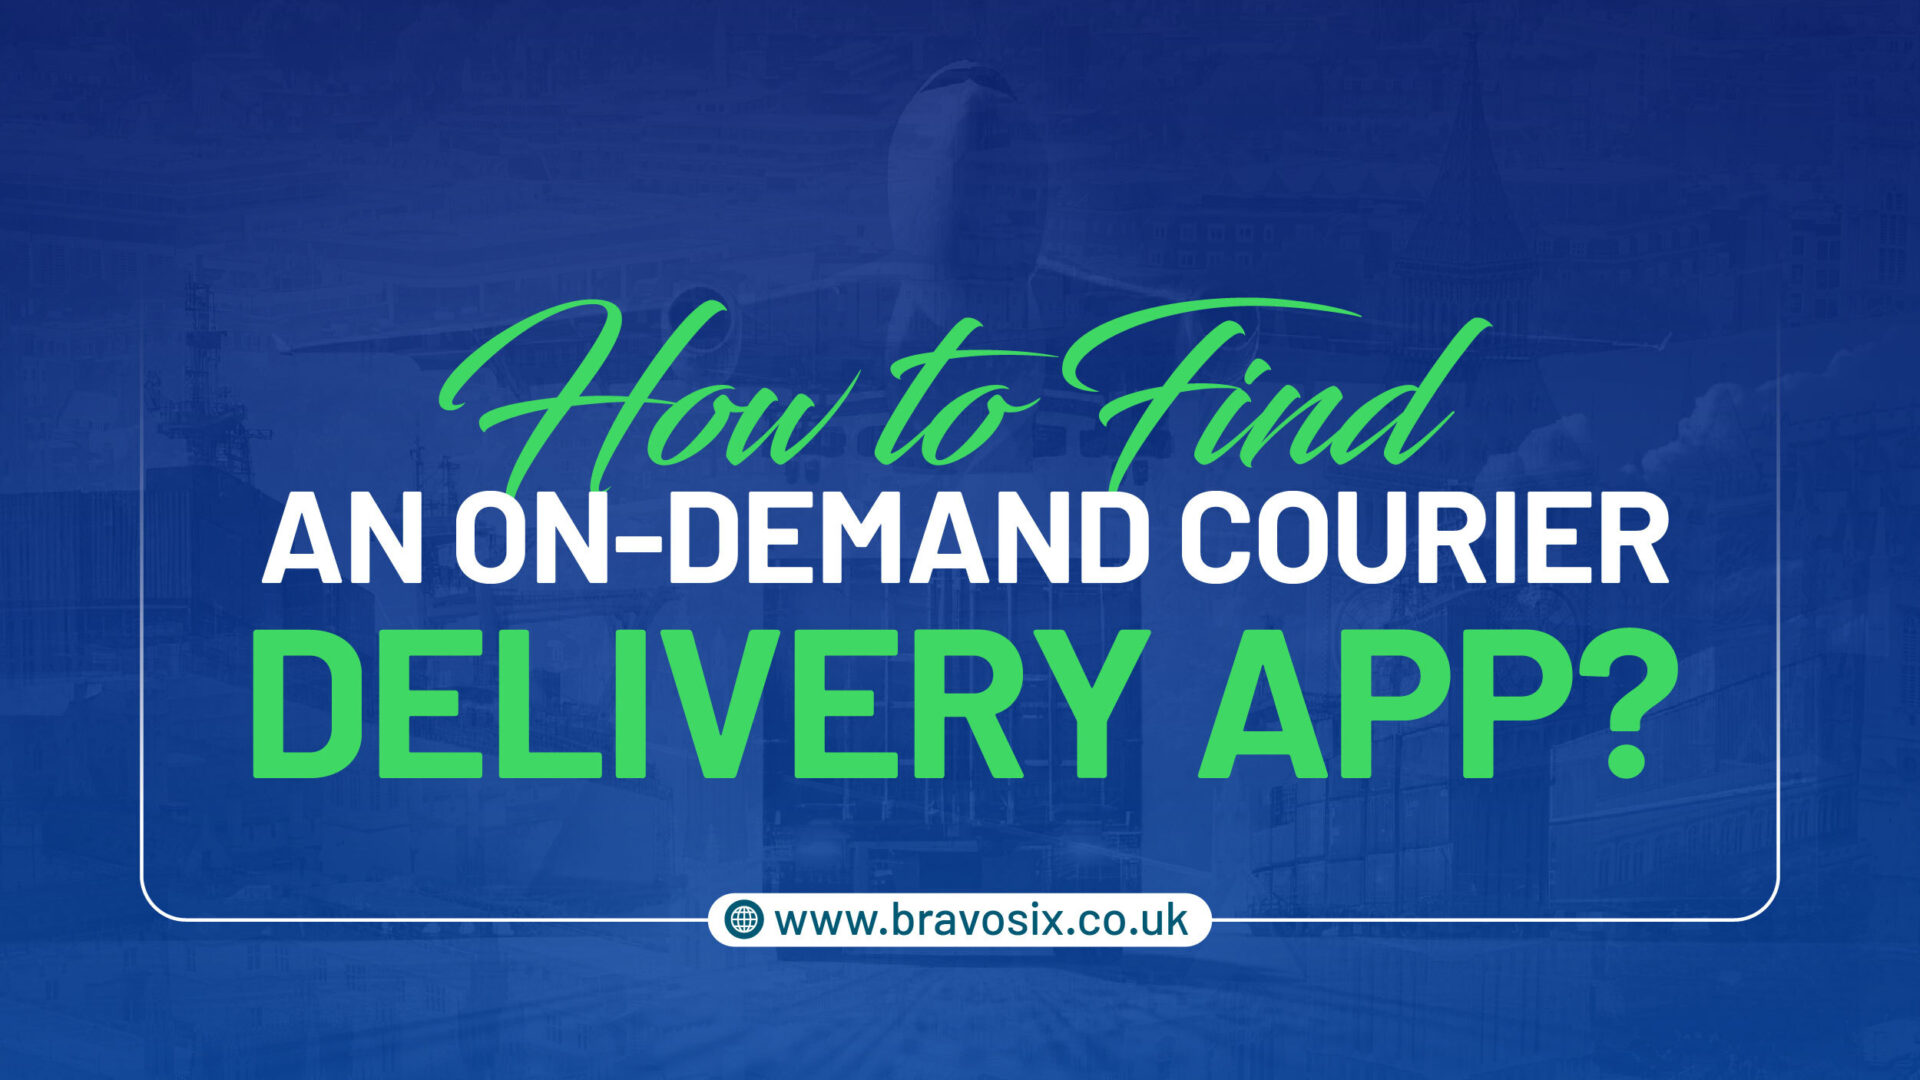 On demand delivery courier apps